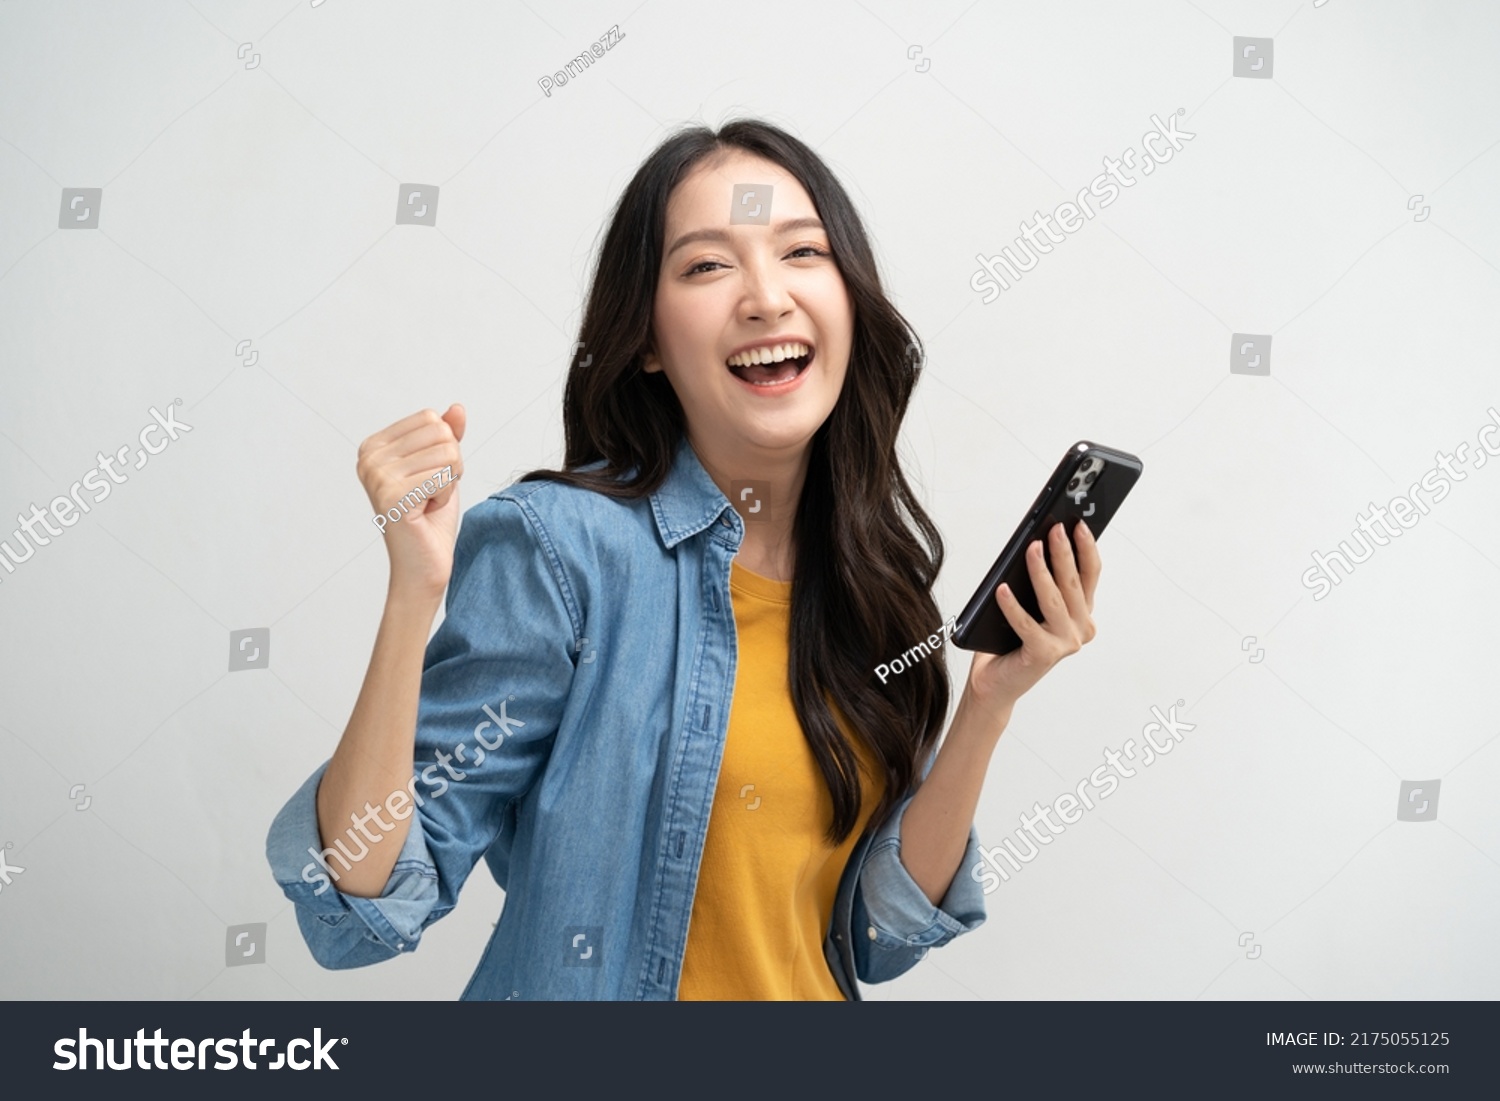 Happy Asian woman holding a smartphone and winning the prize. #2175055125